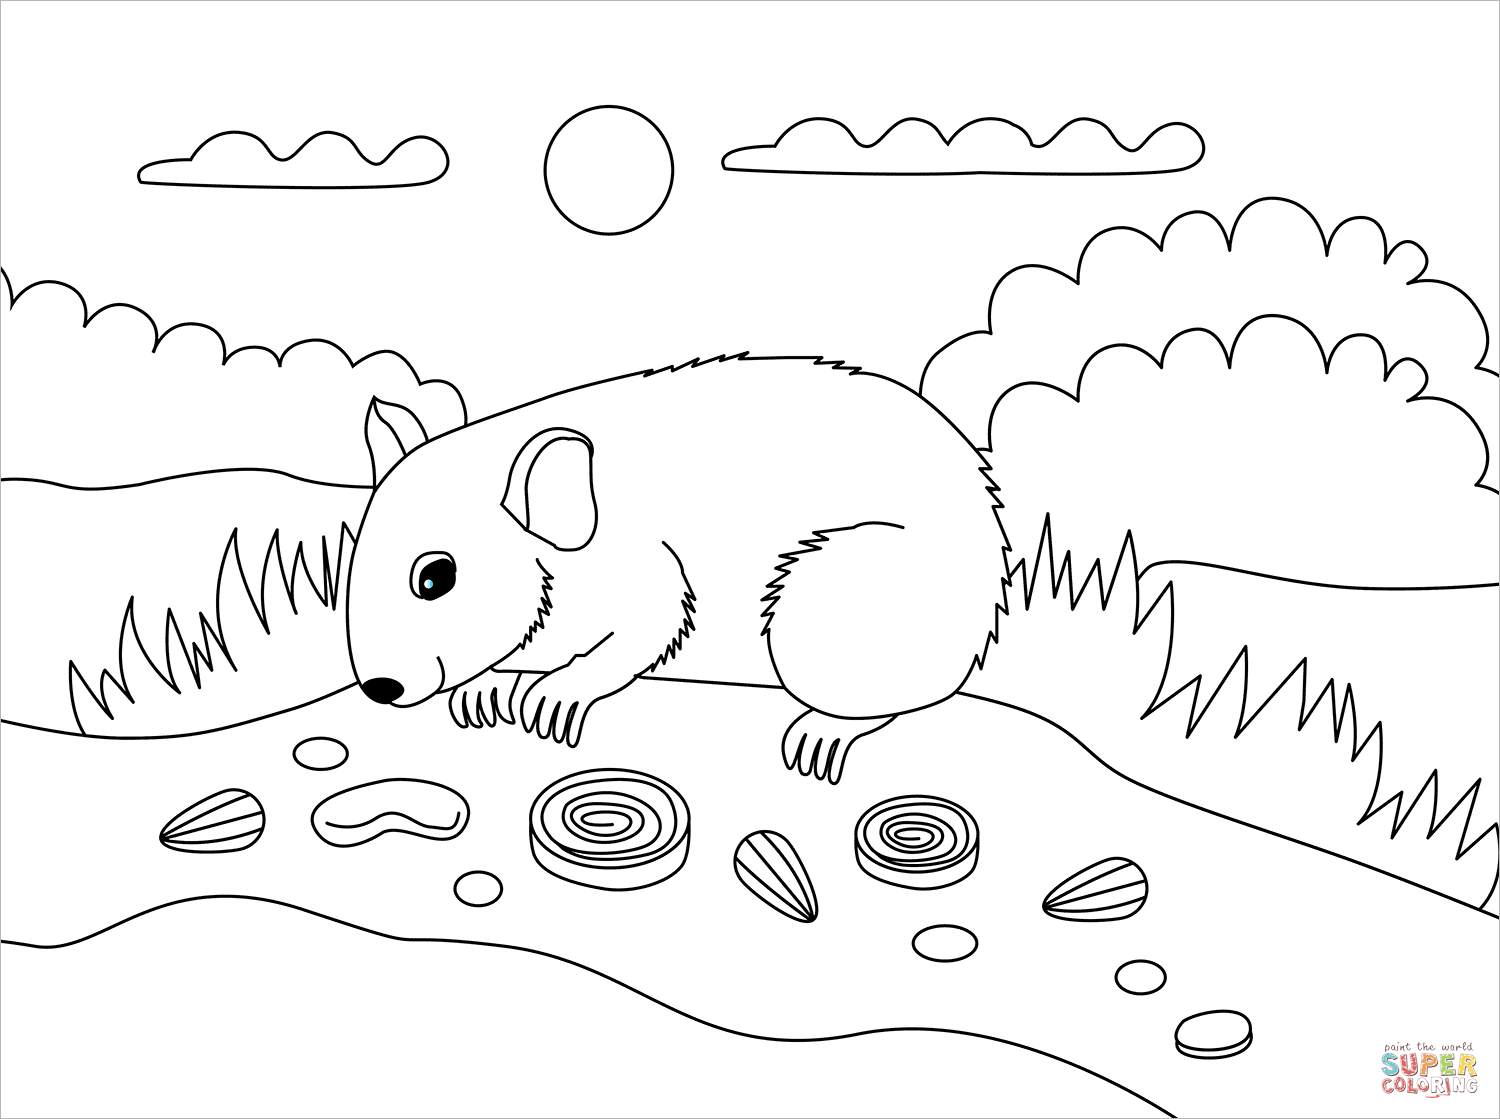 Hamster coloring page free printable coloring pages